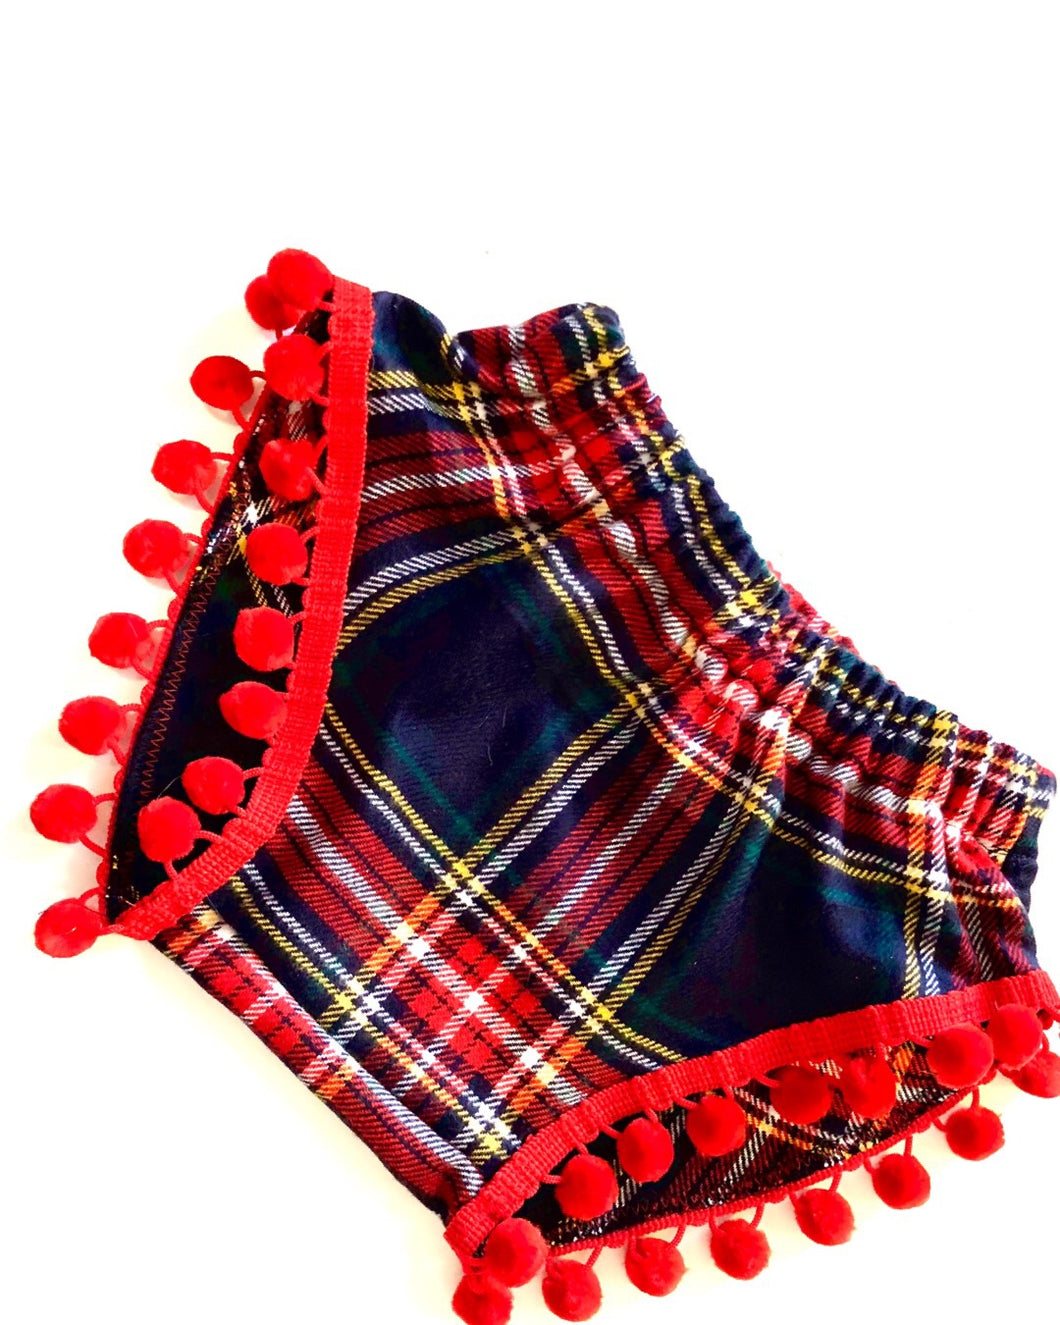 Mad About Plaid Pom Shorties